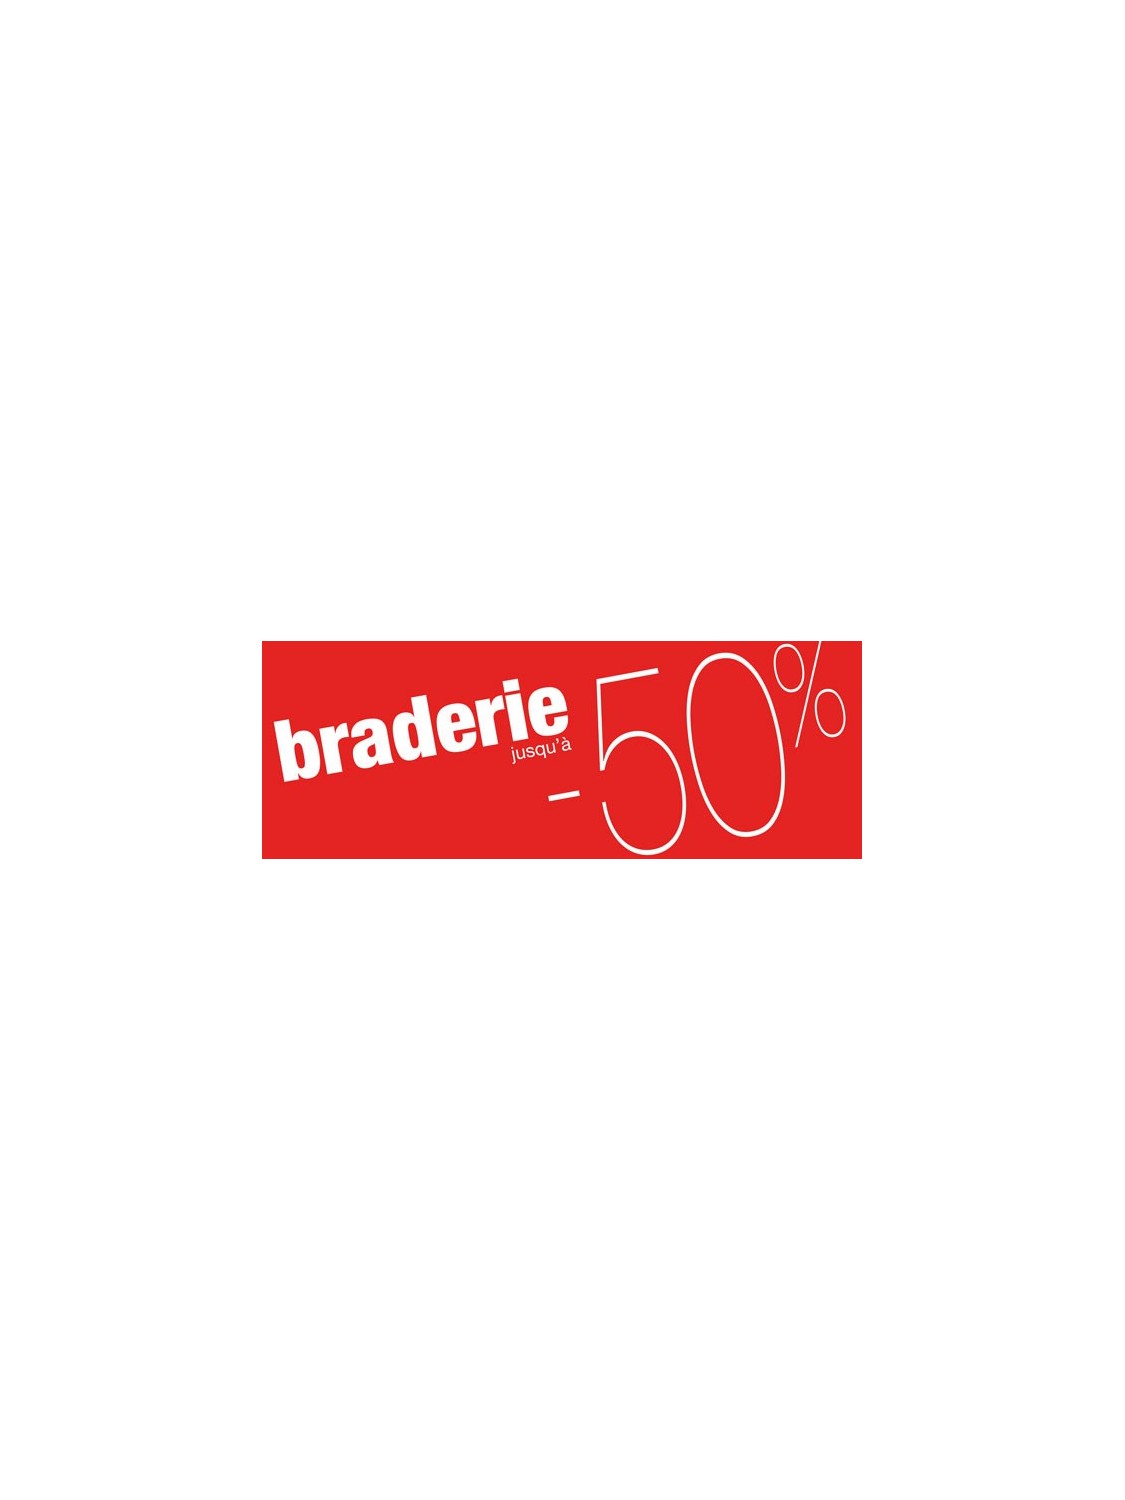 Bandeaux "braderie -50%" rouge